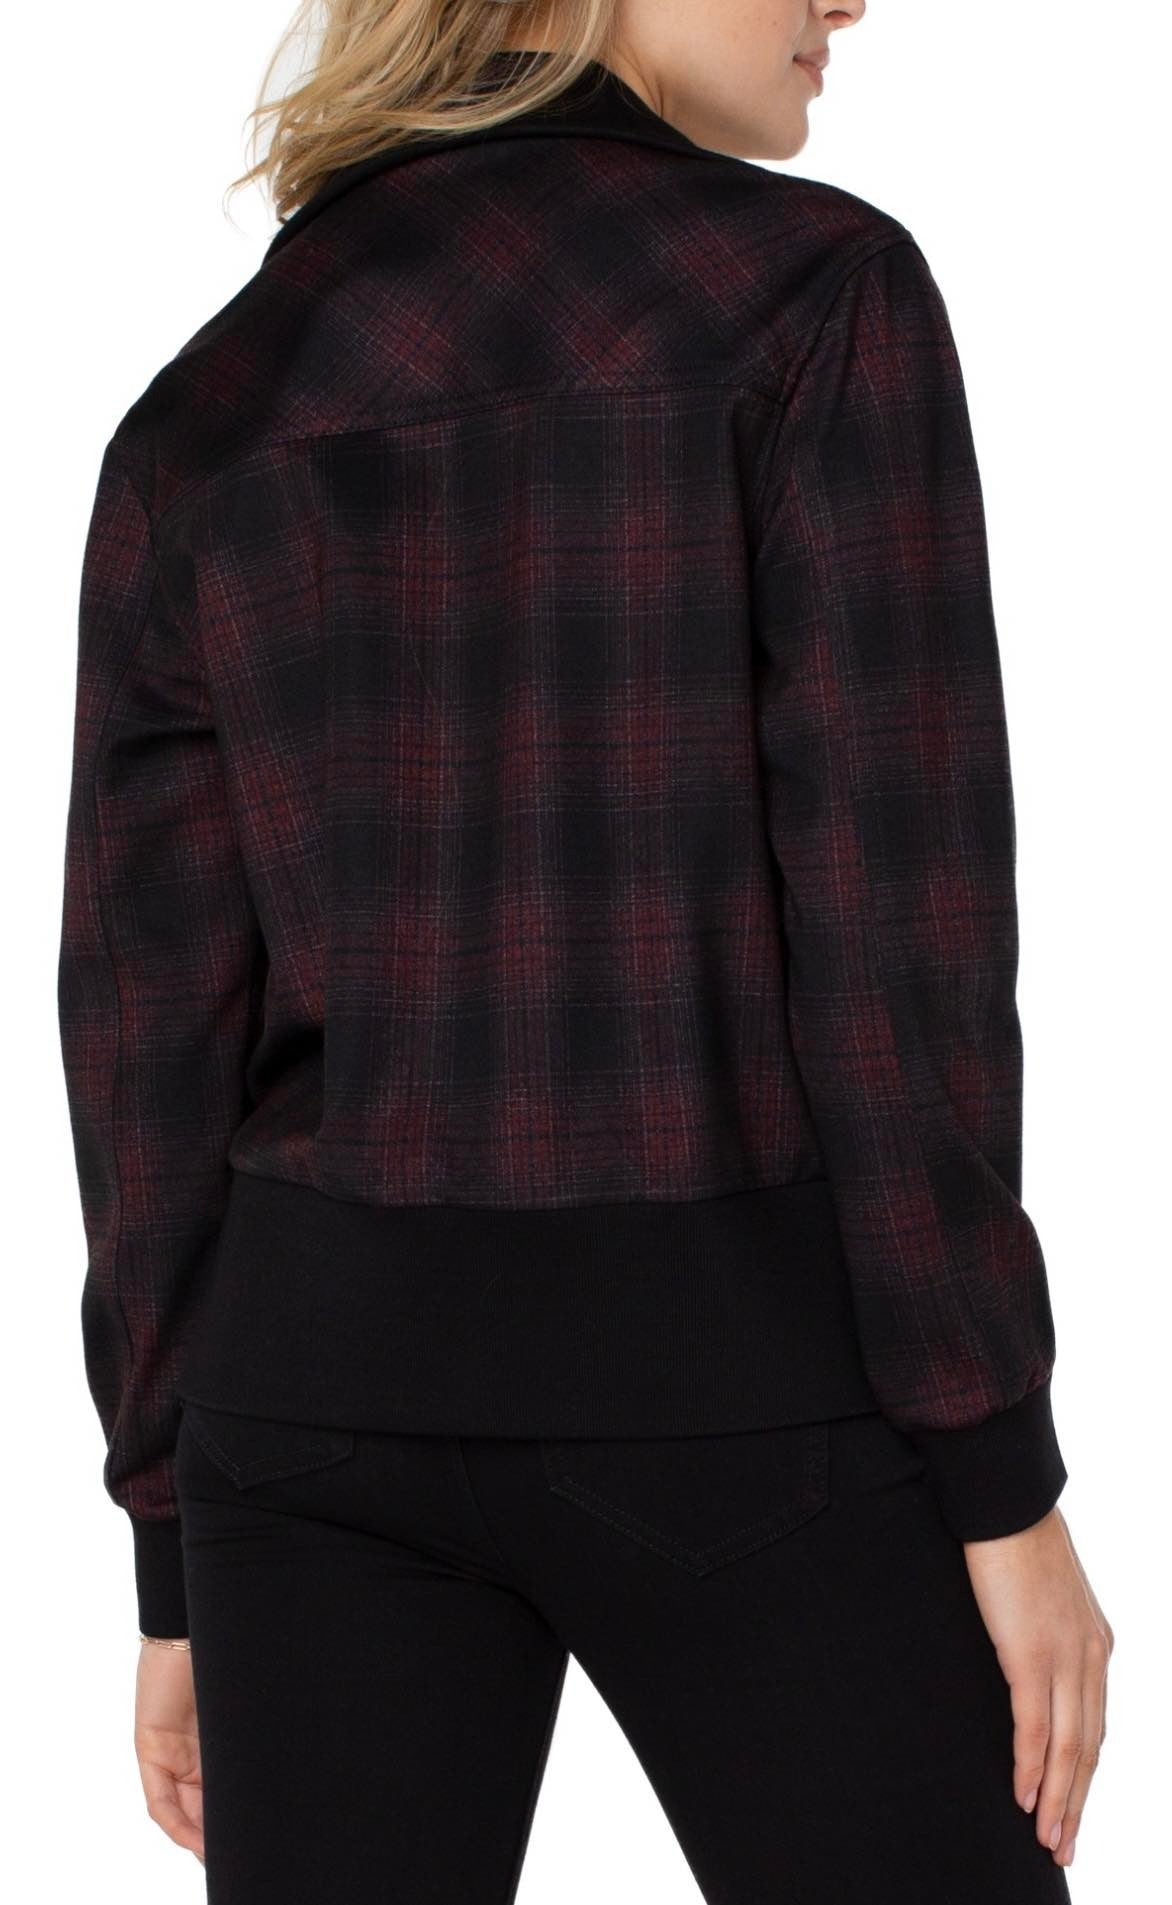 Liverpool Collared plaid Bomber Jacket - Clearance Final Sale